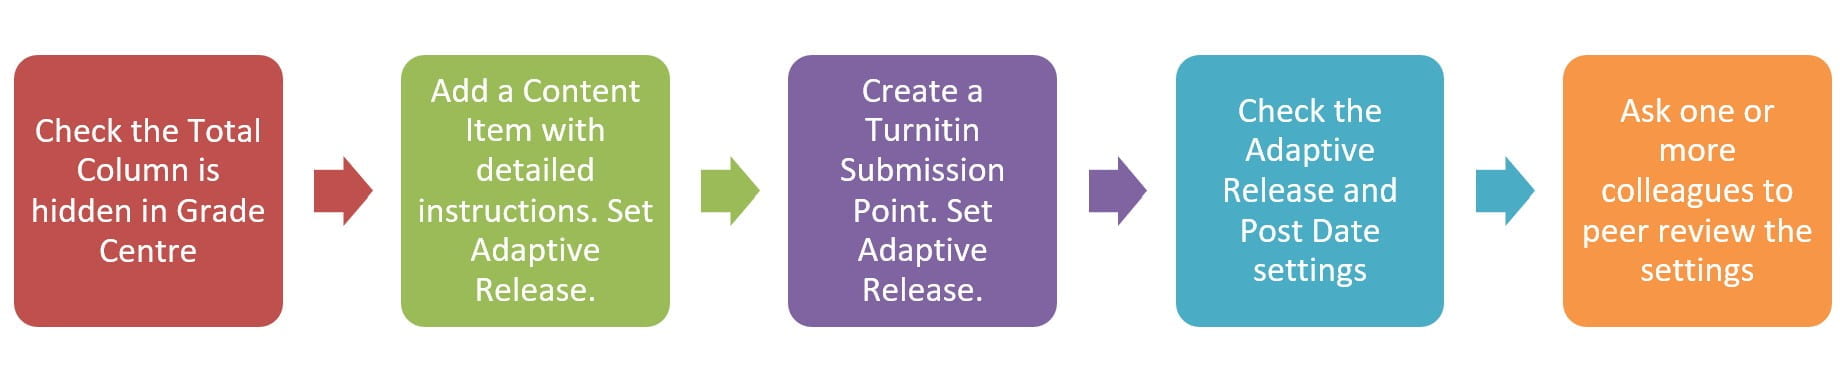 Flow diagram of 5 stages: "Check the total column is hidden in grade centre", "Adda a content item with detailed instructions. Set adaptive release", "Create a Turnitin submission point. Set adaptive release", "Check the adaptive release and post date settings", "Ask one or more colleagues to peer review the settings".